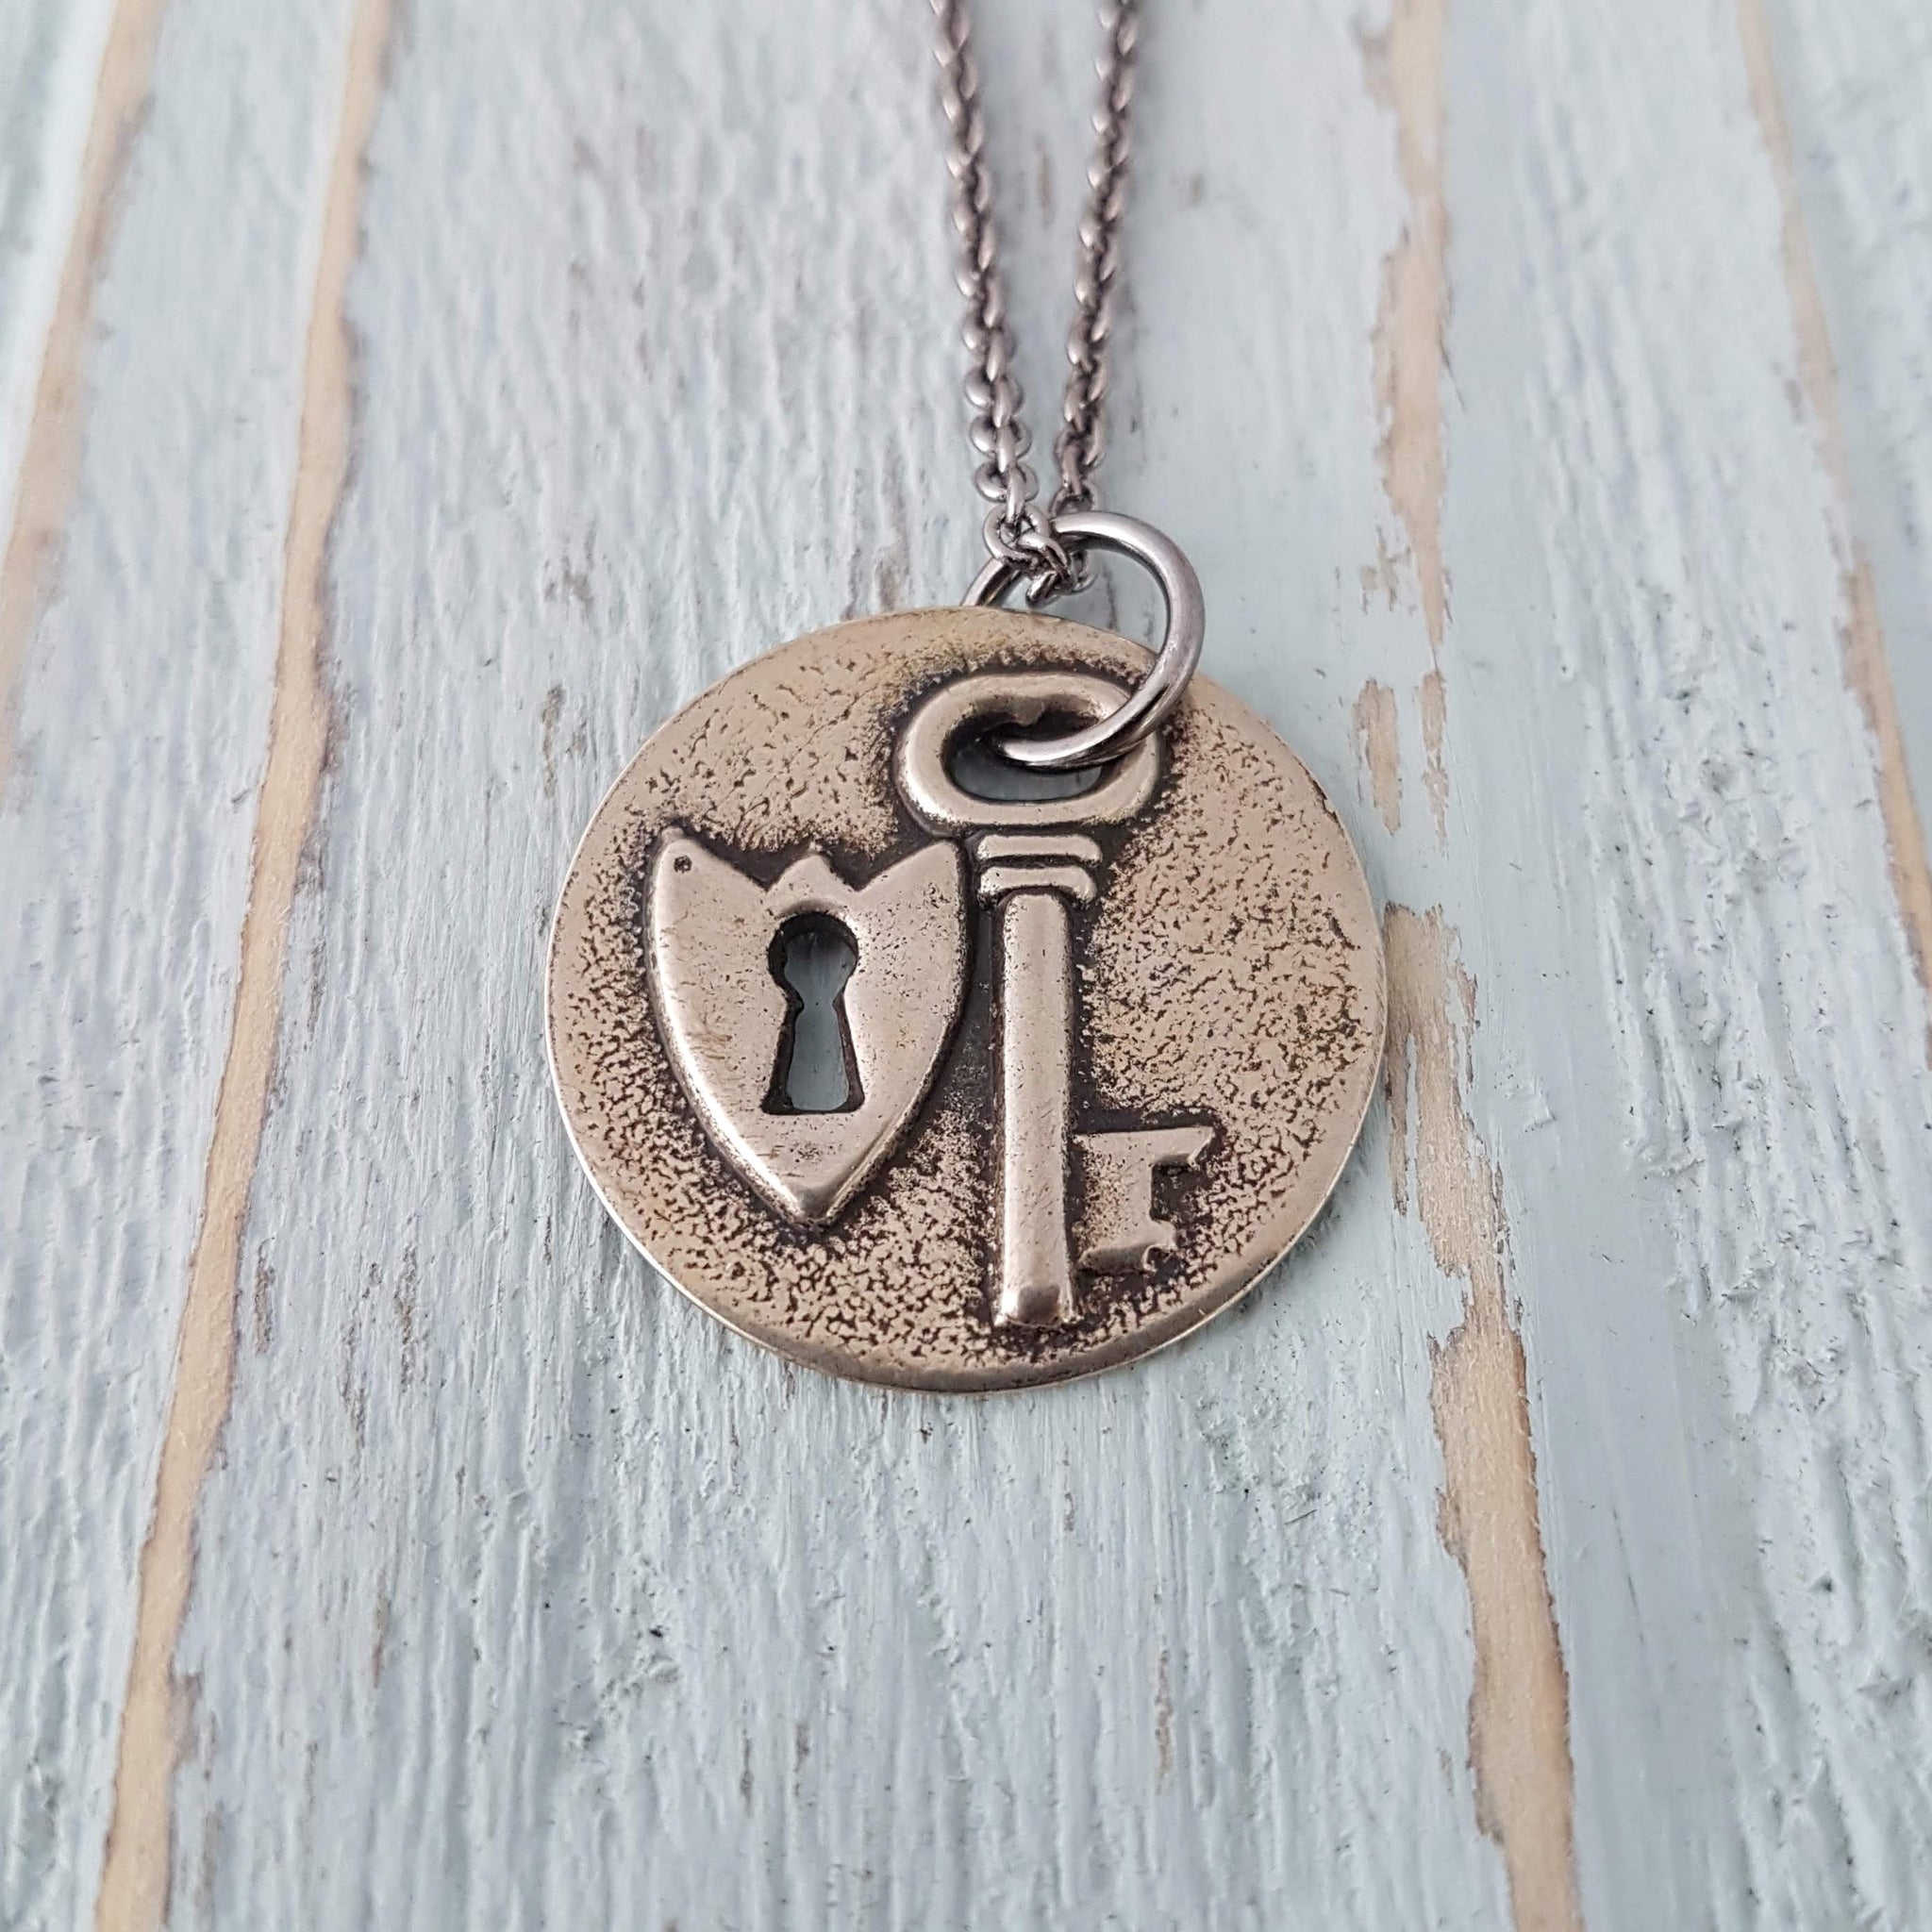 Lock and Key Necklace - Gwen Delicious Jewelry Designs